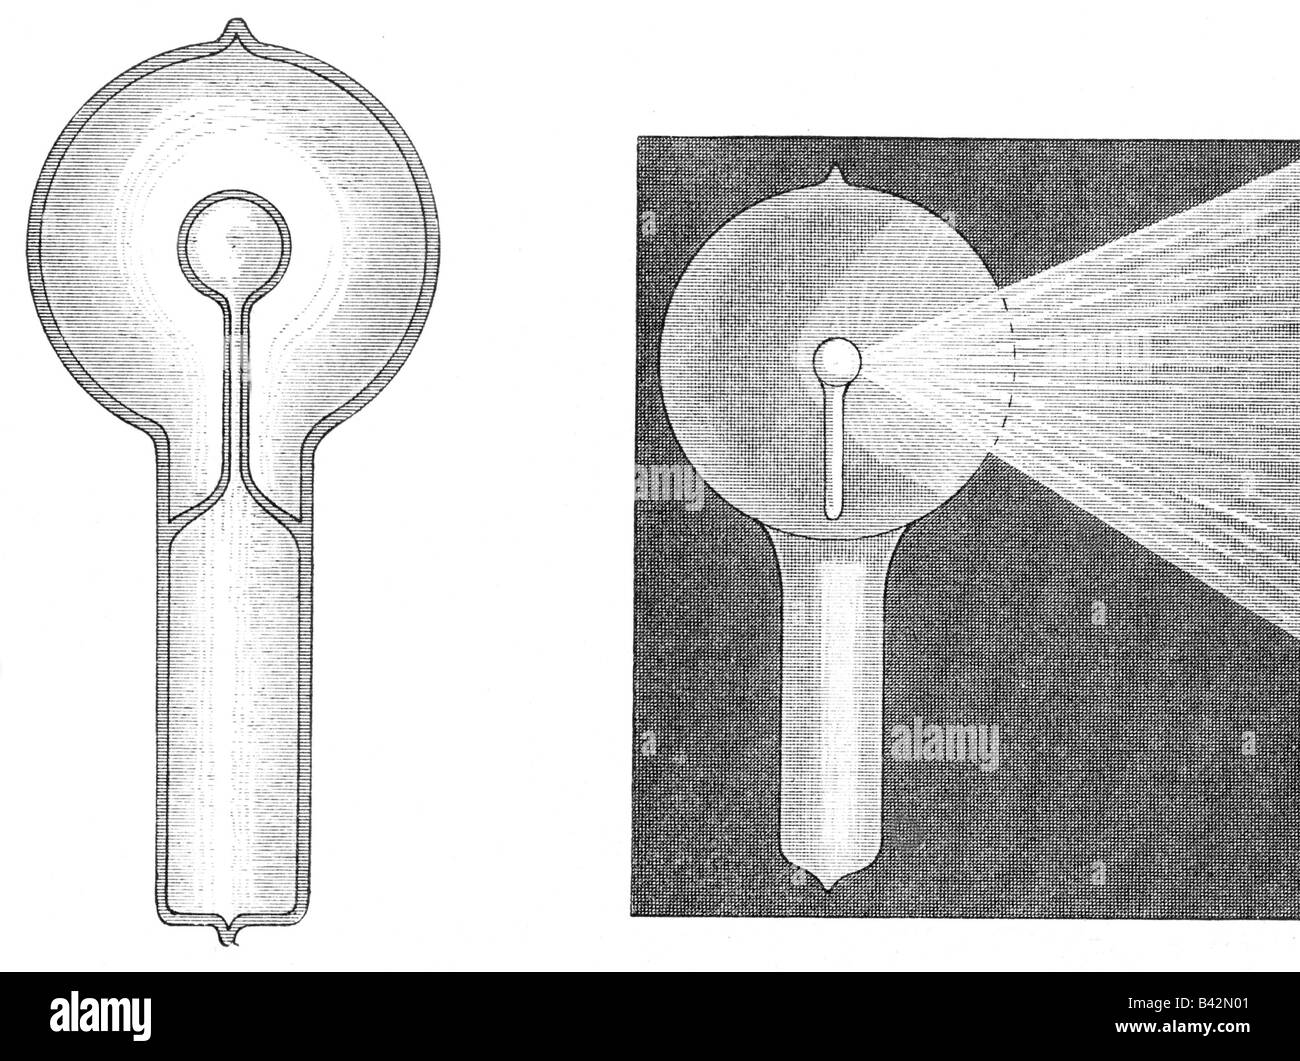 Tesla, Nicola 10.7.1856 - 18.1.1943, American scientist (physicist), mechanical engineer, electrical engineer, electric lamp, engraving, 19th century, historical, historic, science, physics, electricity, , Stock Photo